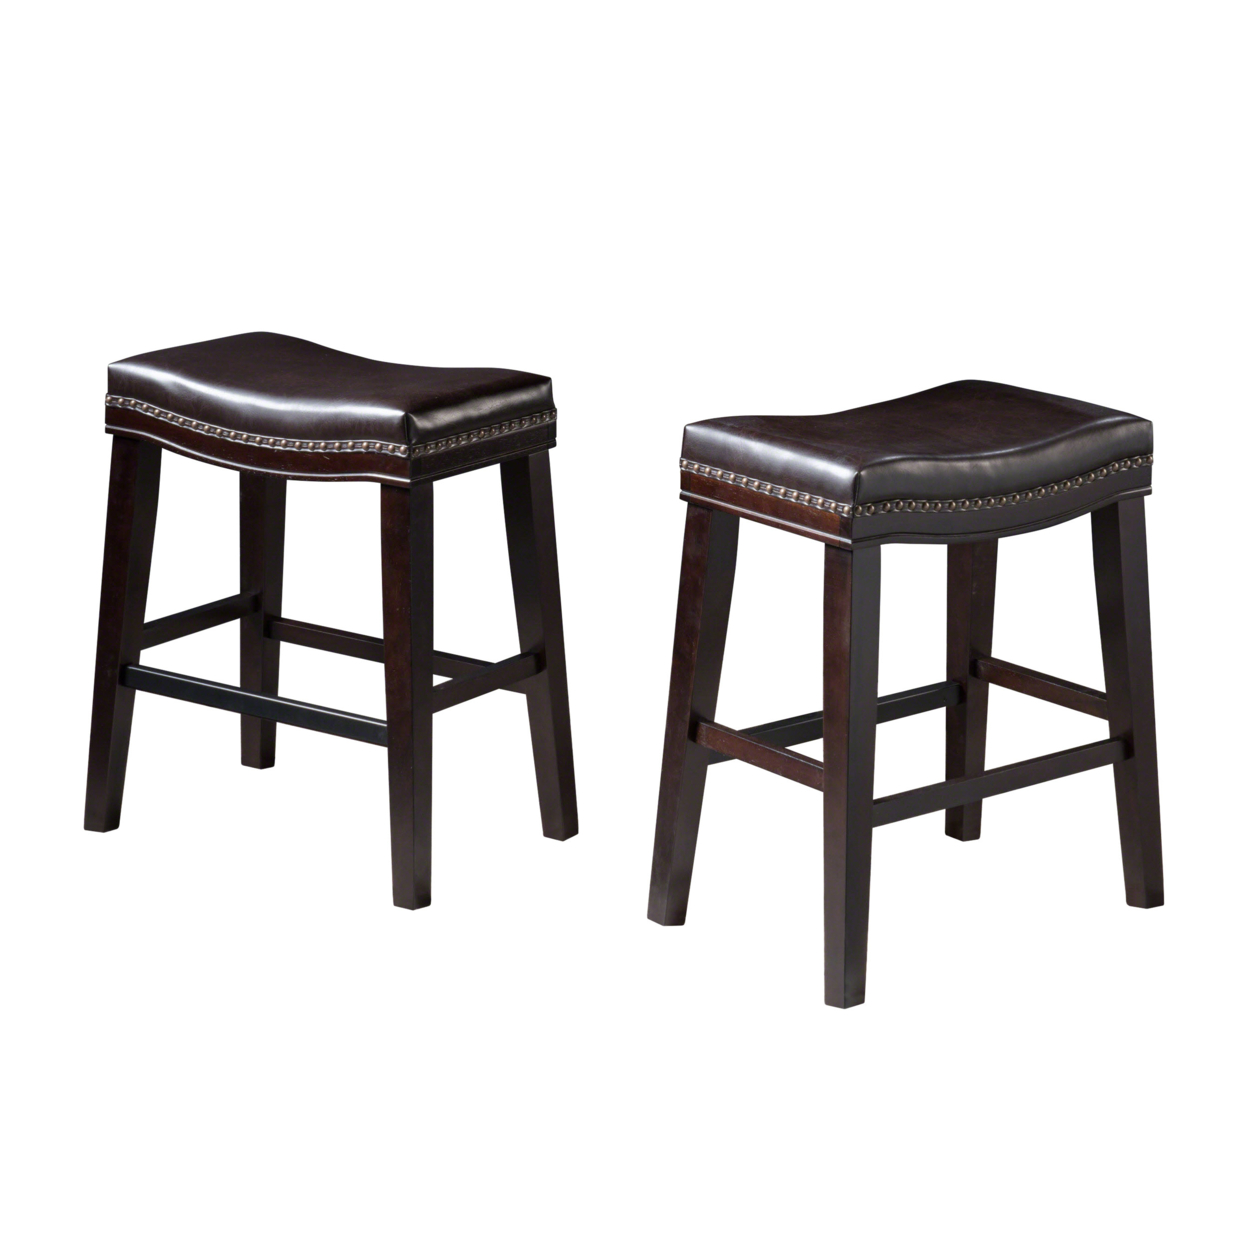 Kainu Contemporary Upholstered Saddle Counter Stool With Nailhead Trim (Set Of 2) - Brown